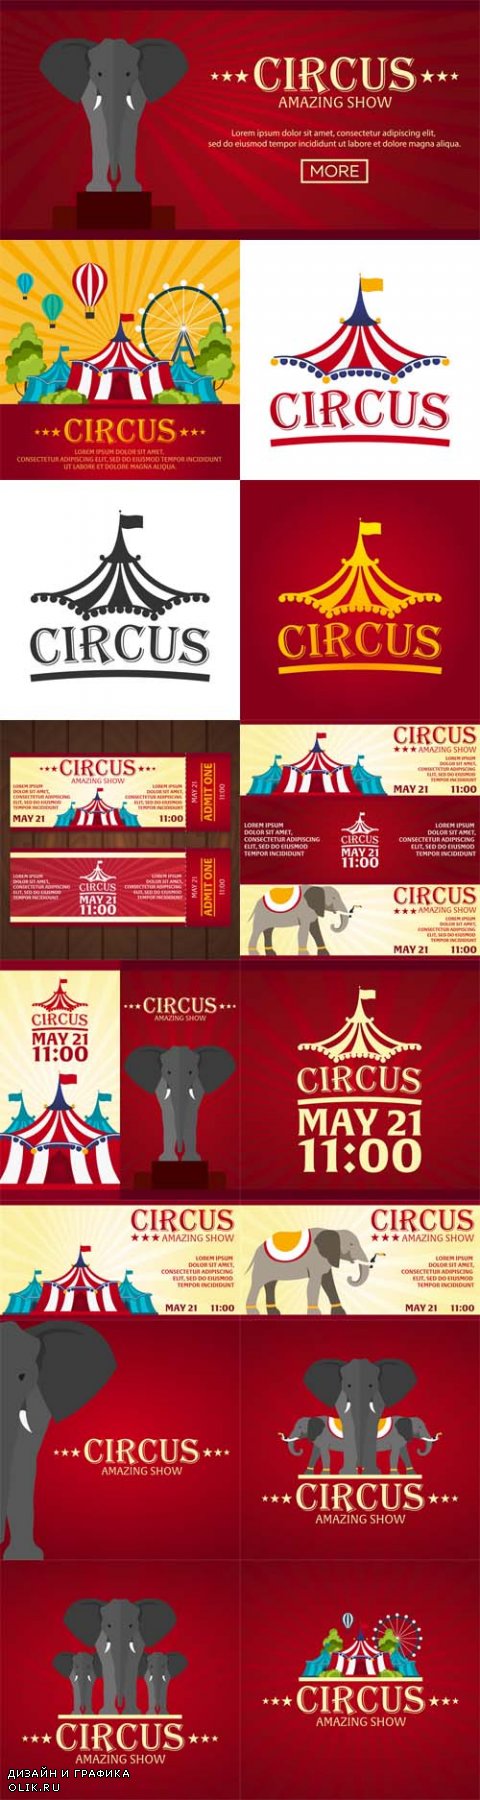 Vector Circus Banners, Tickets. Flat Design